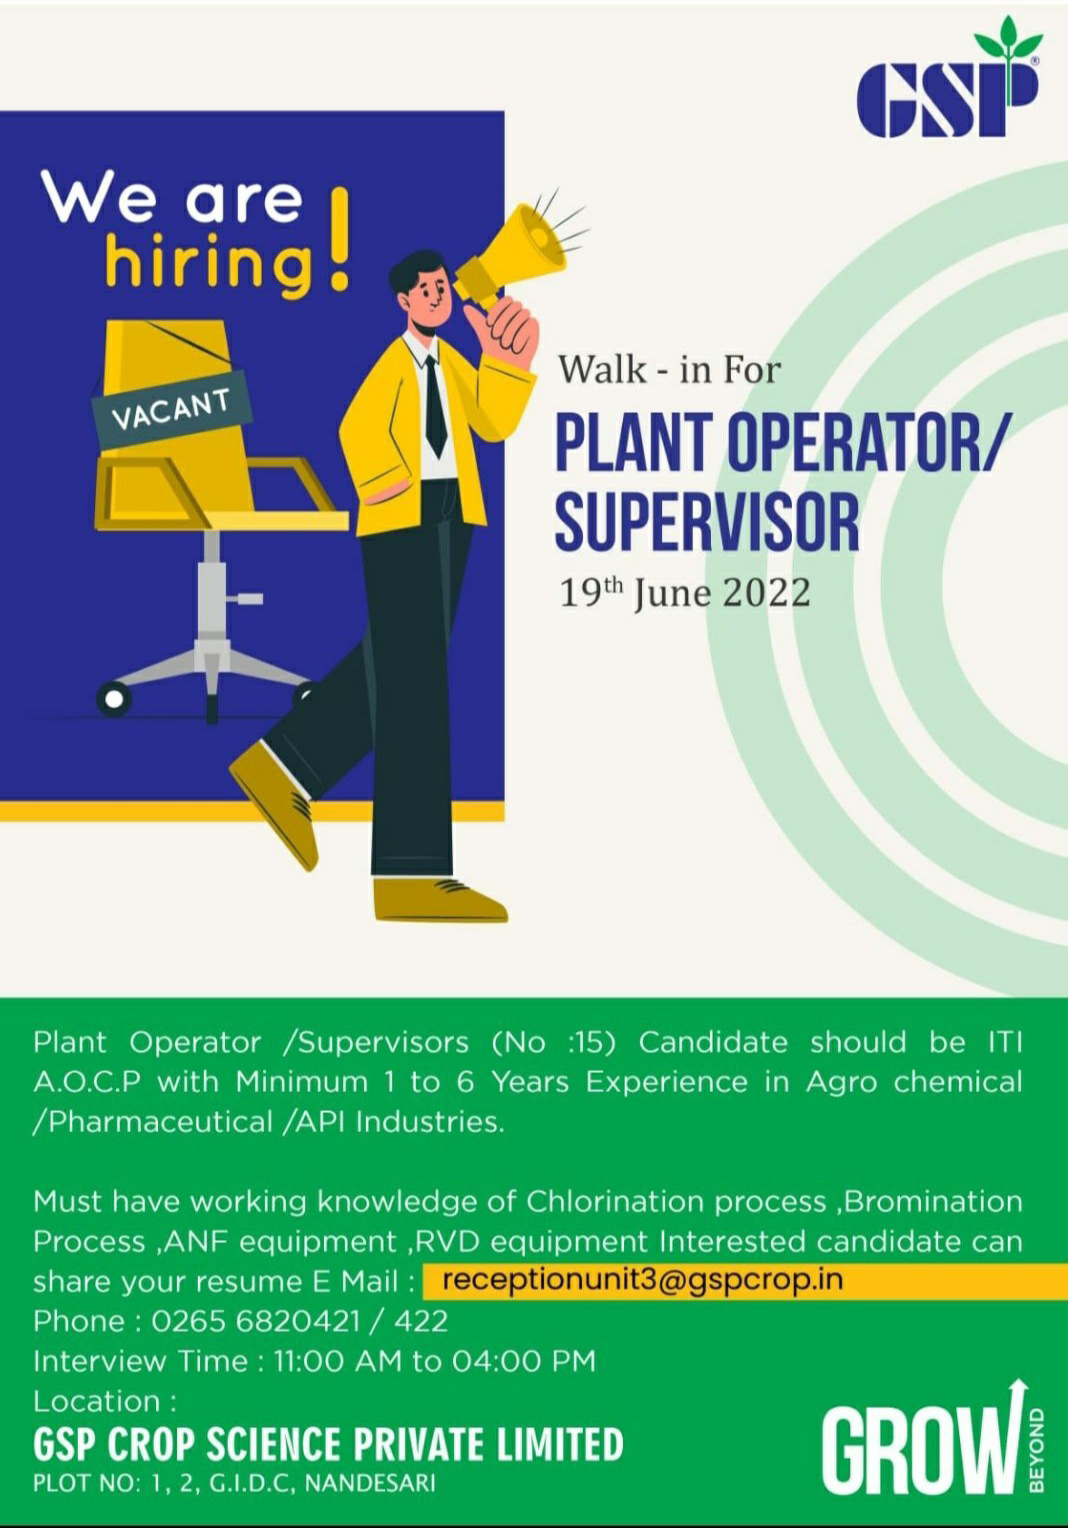 Job Available's for GSP Crop Science Pvt Ltd Walk-In Interview for ITI-AOCP